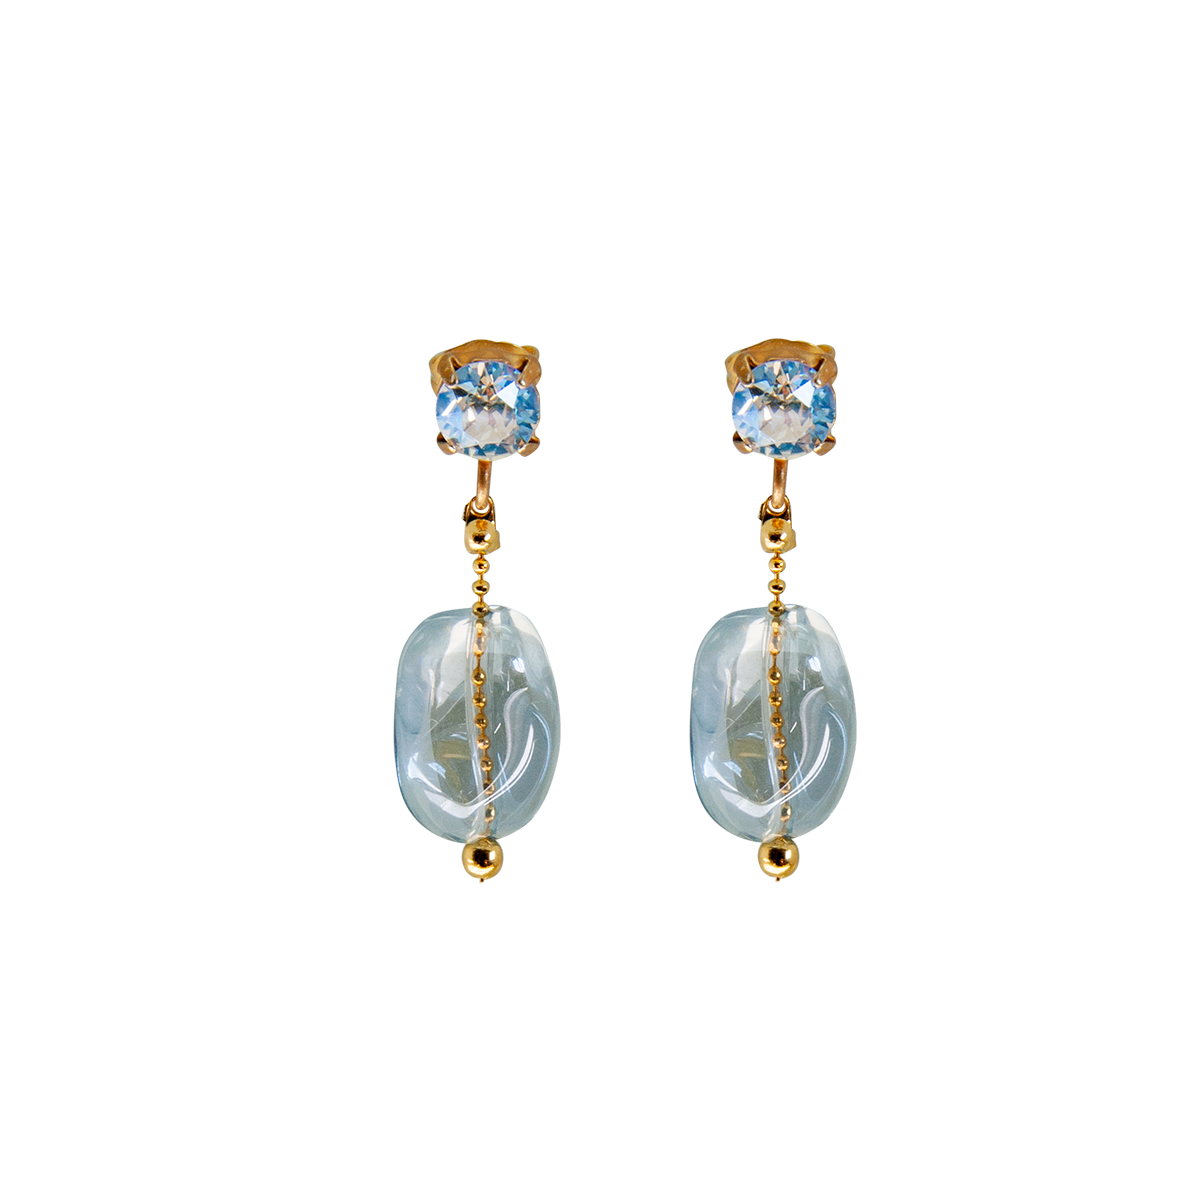 Pale blue glass nugget earrings hanging from sparkling rhinestone posts